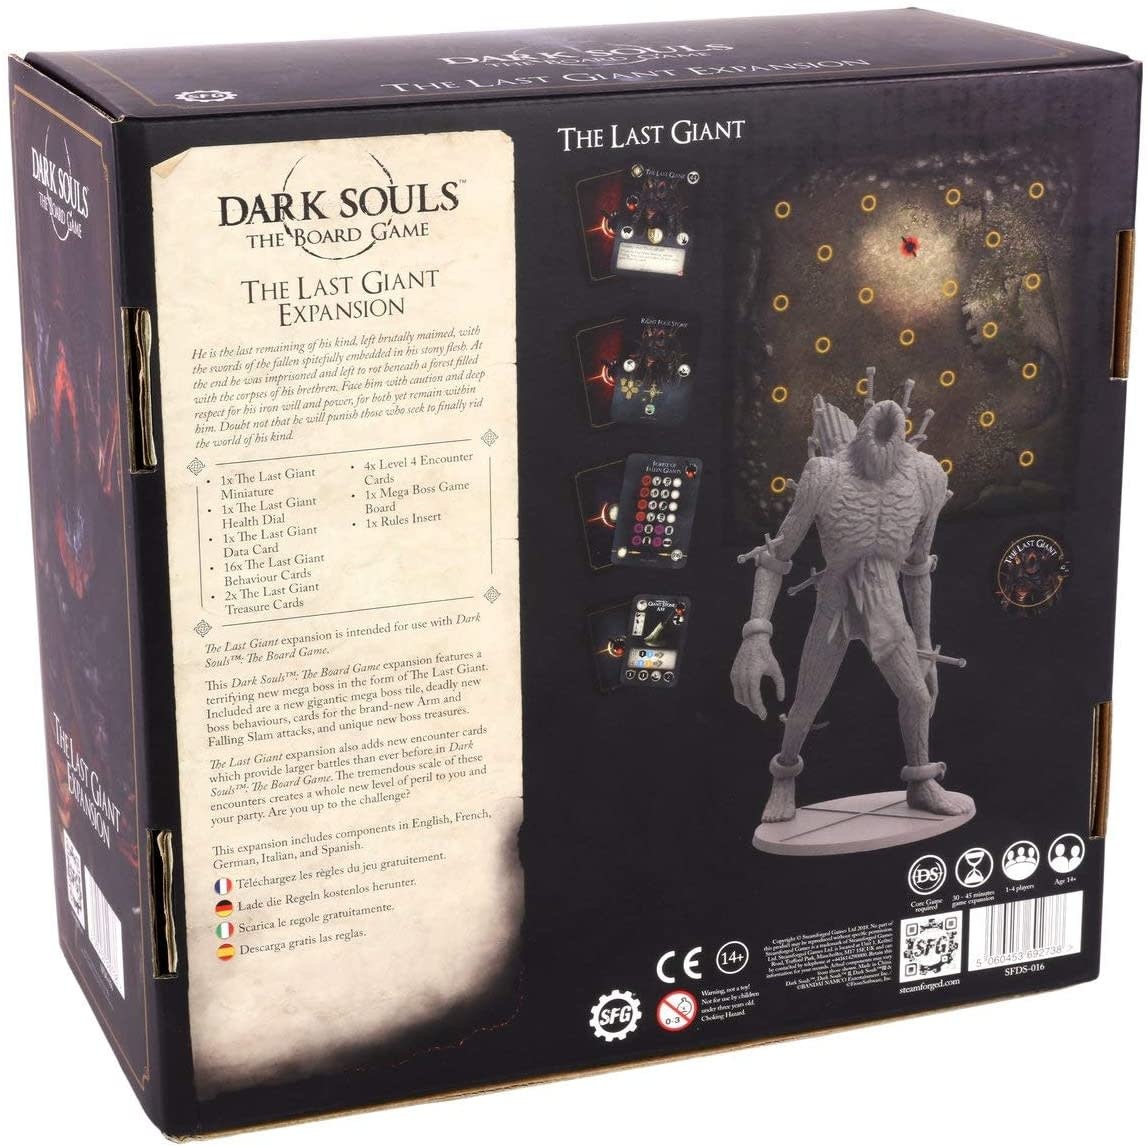 Steamforged Dark souls board game: The Last Giant